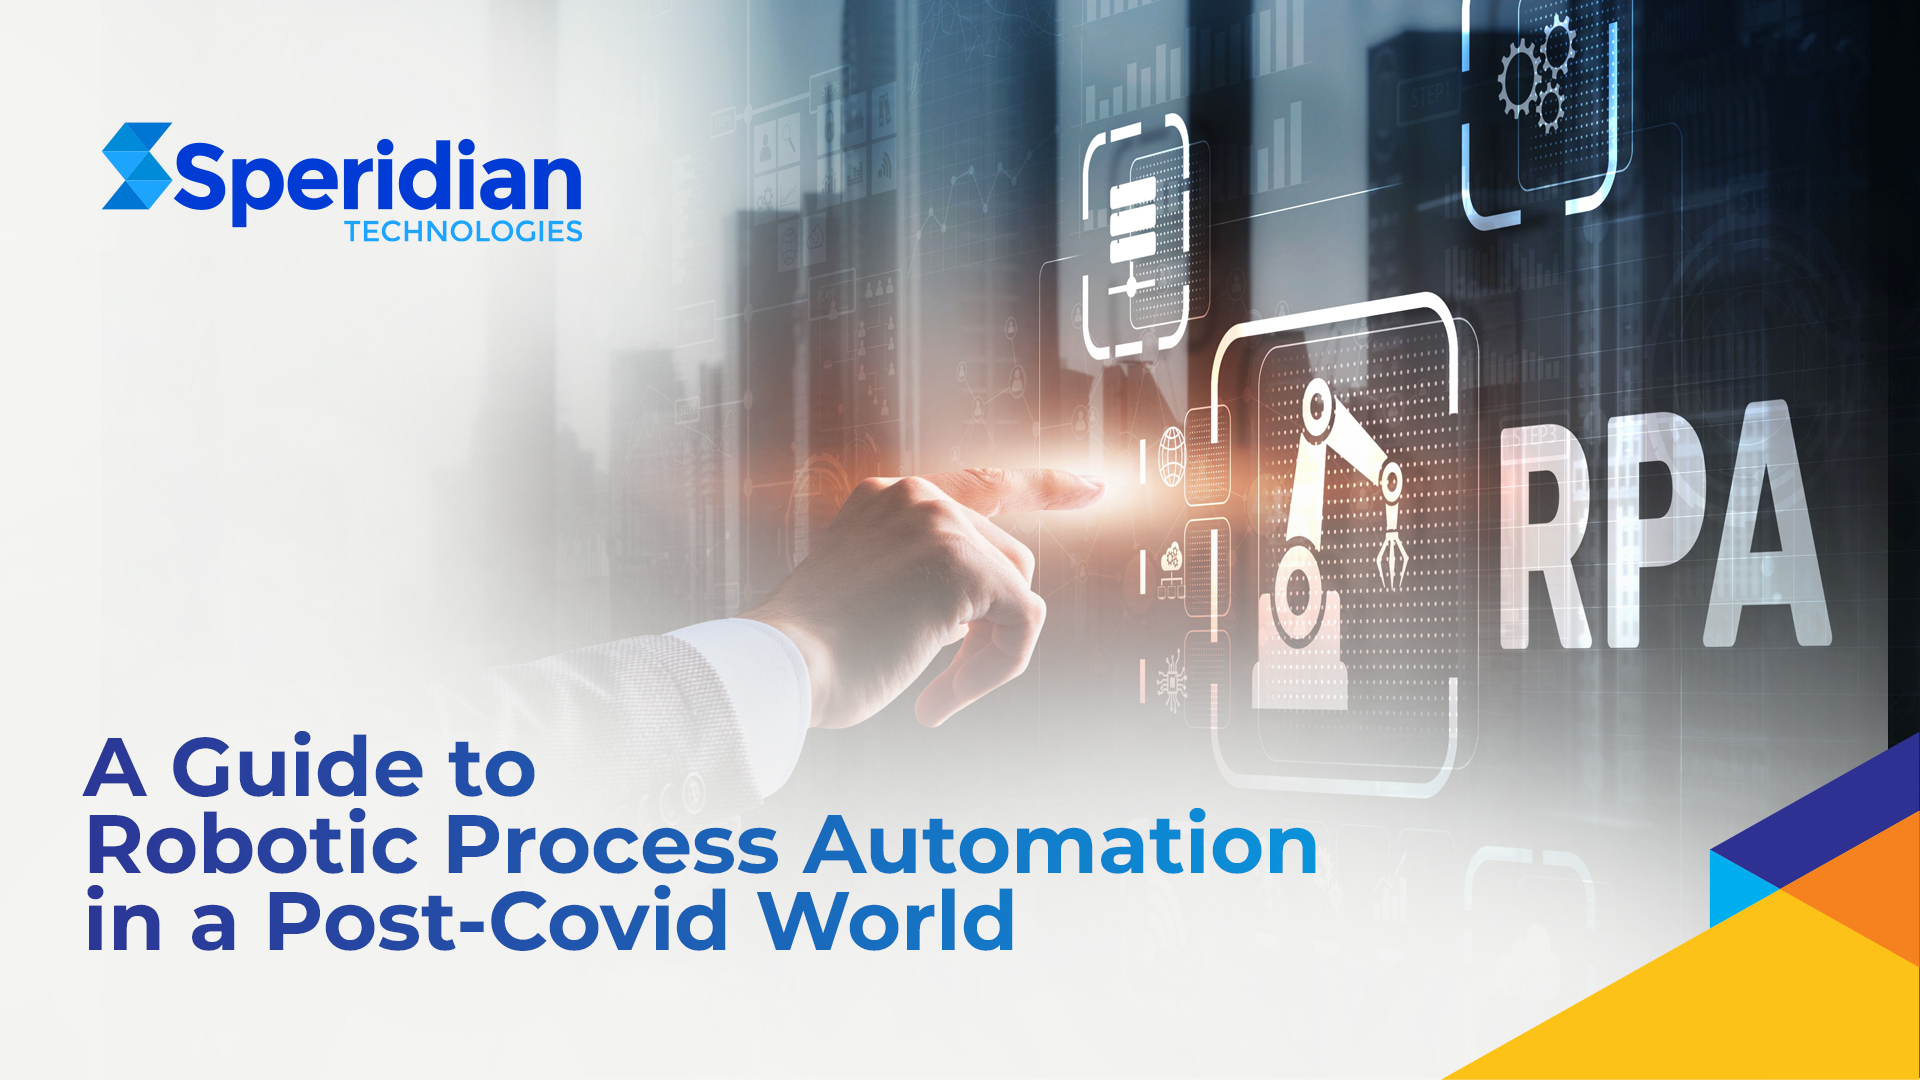 A Guide to Robotic Process Automation in a Post-Covid World